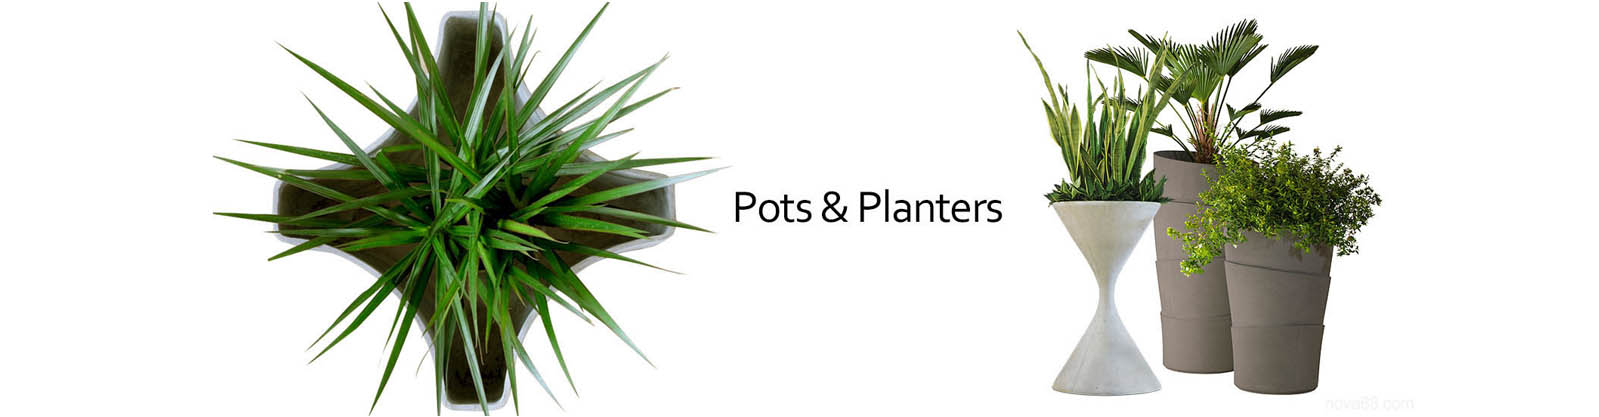 Pot and Planters